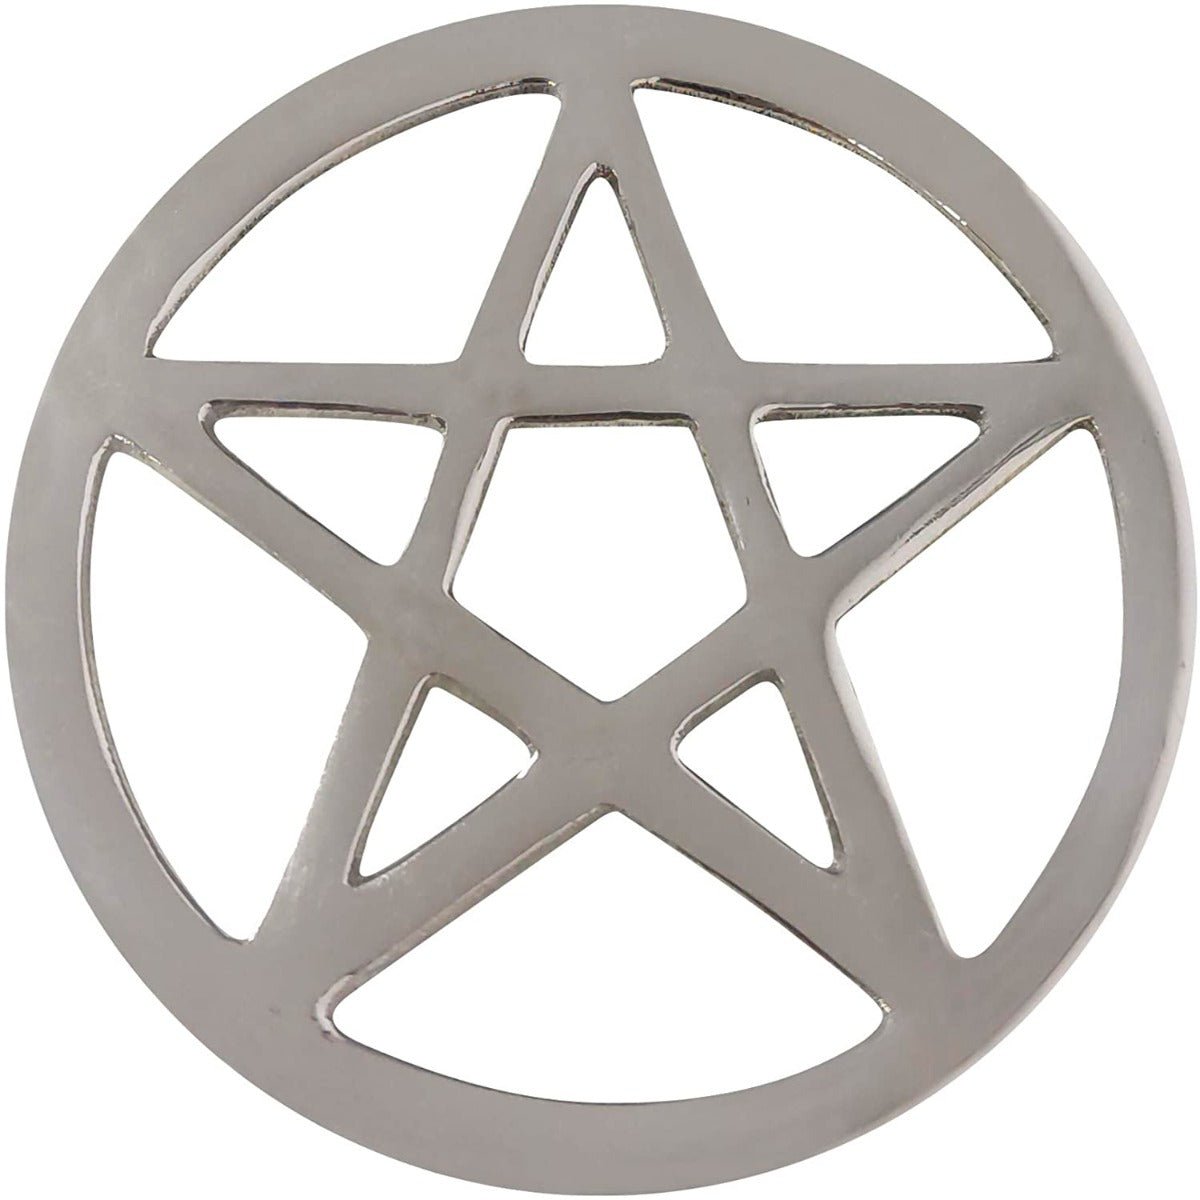 Pentacle Silver Altar Tile, 2.75 inch - 13 Moons